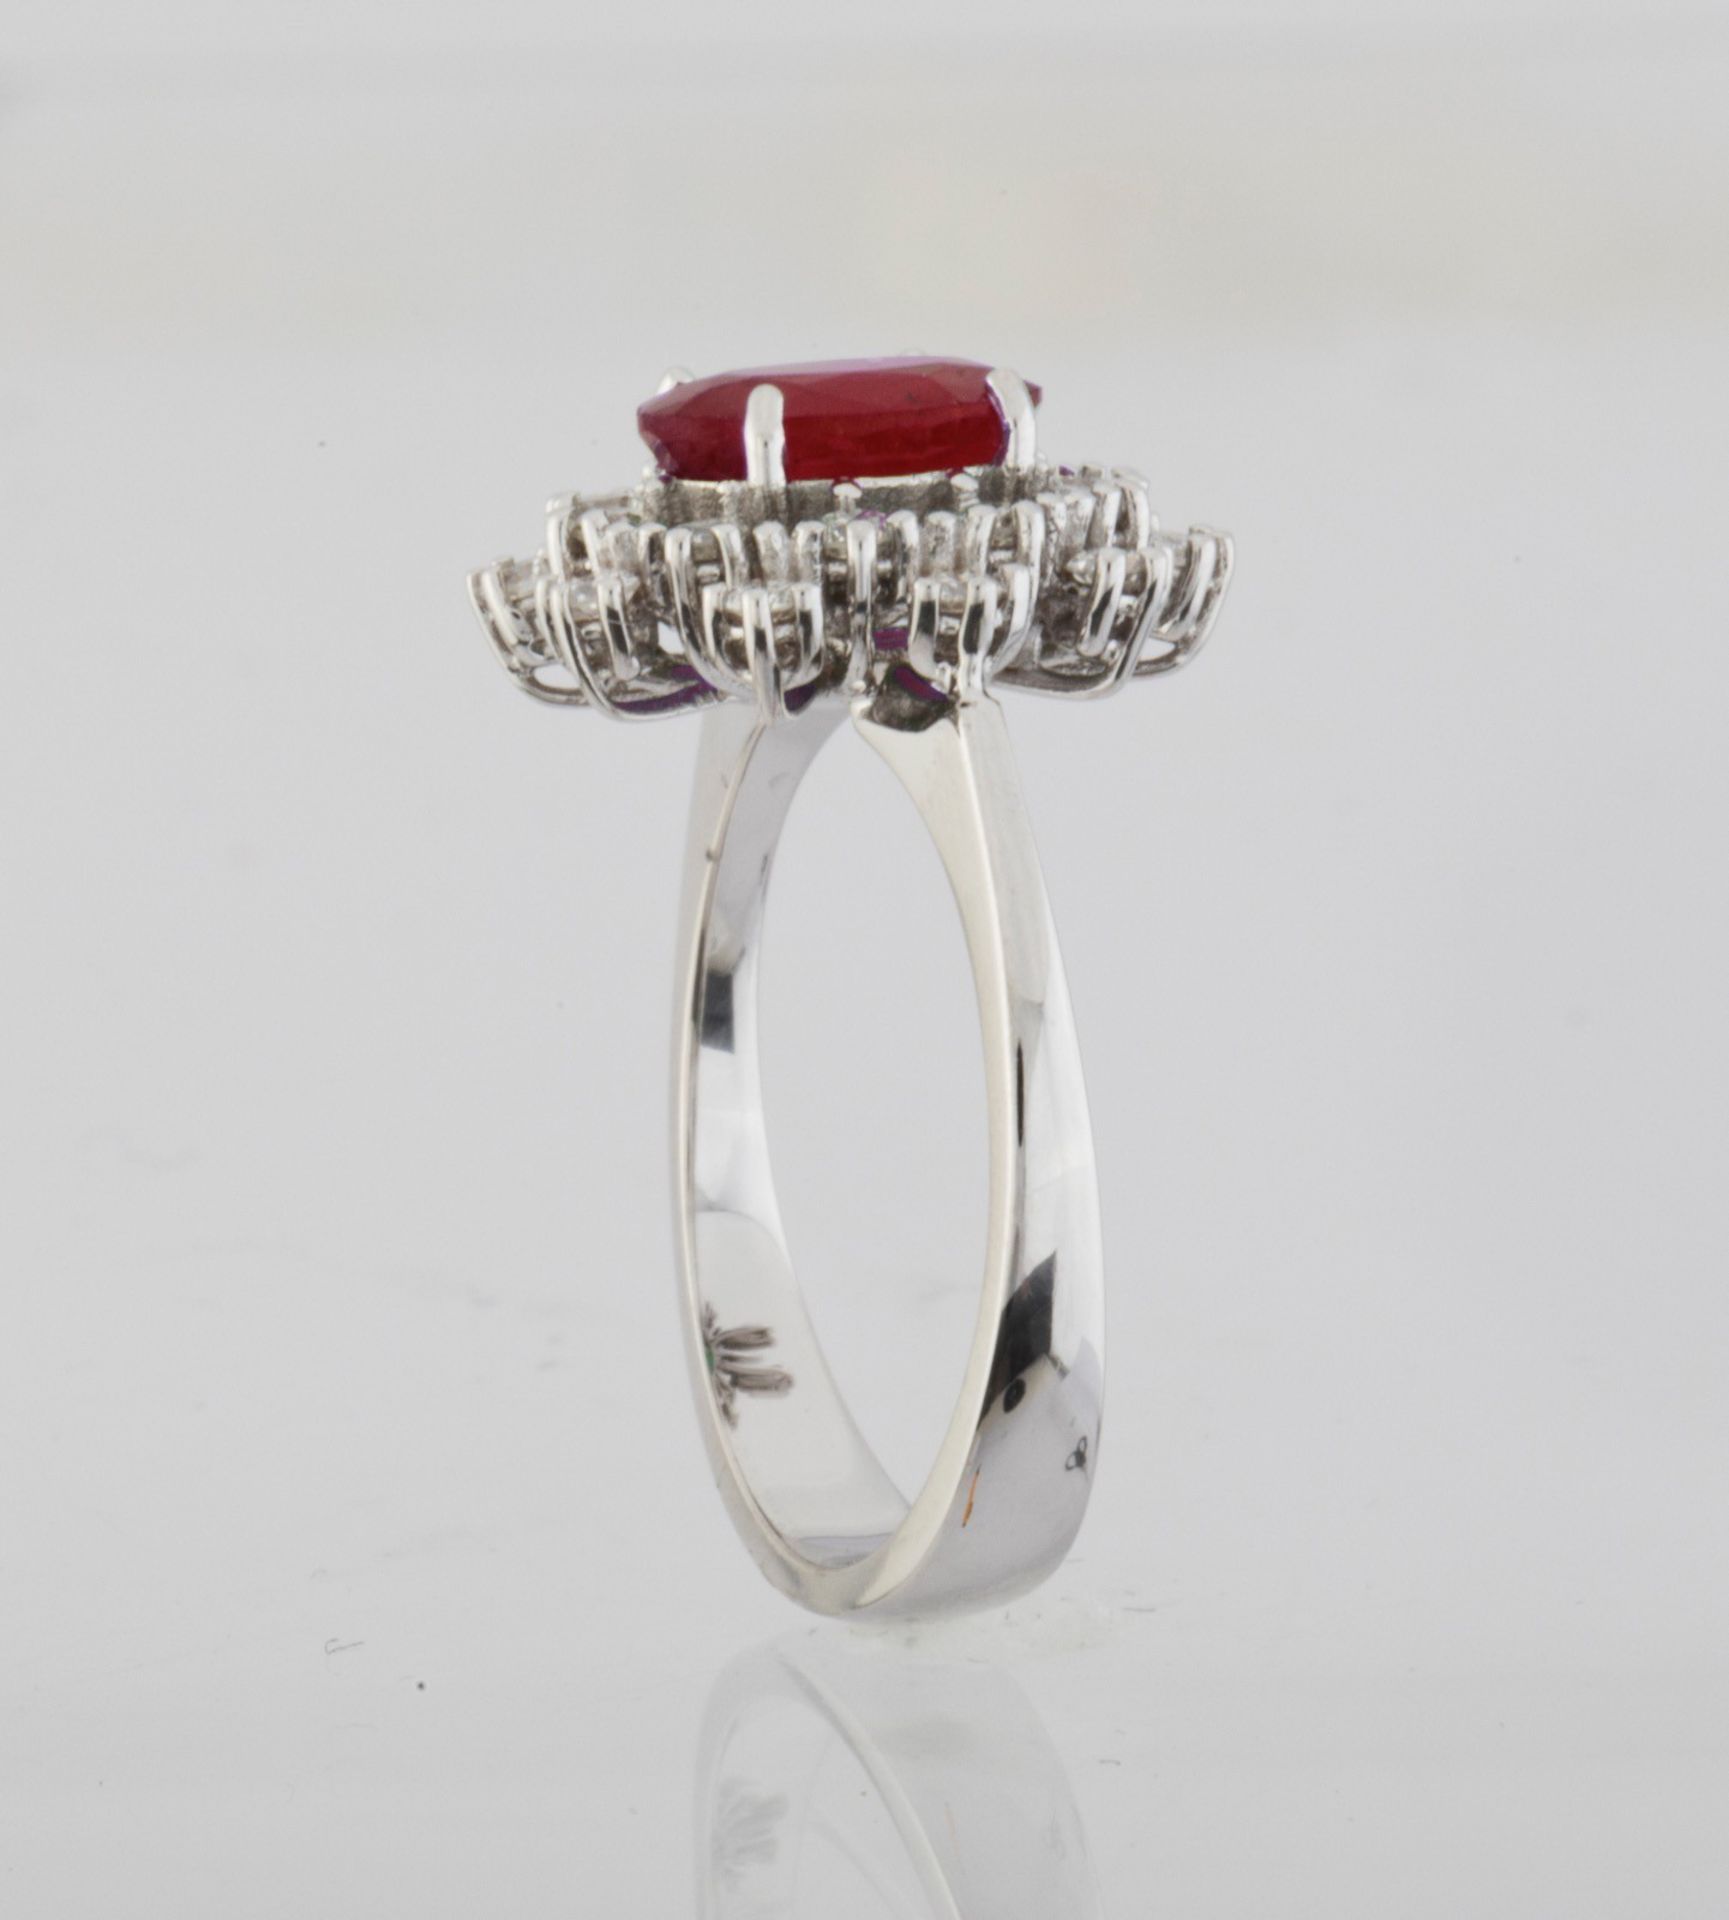 Certificated 18K White Gold Diamond & Ruby Ring - Image 4 of 4